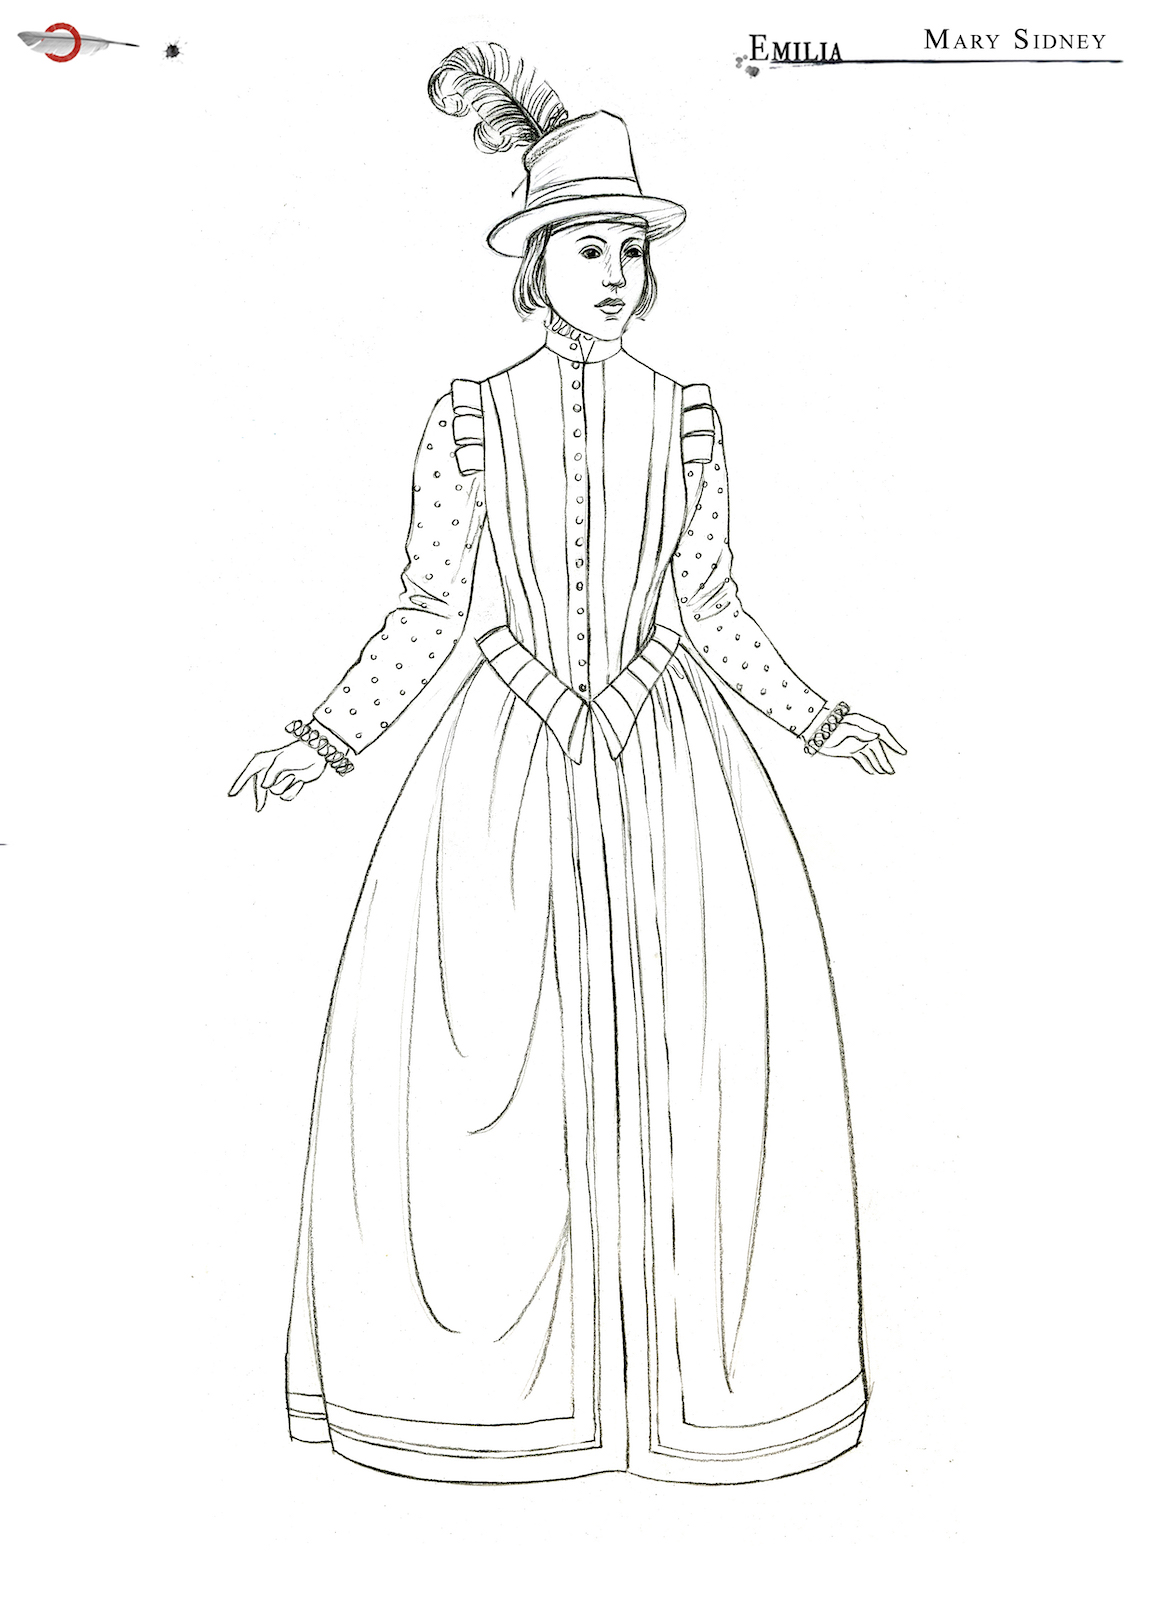 A costume sketch of an Elizabethan dress and a hat with a feather in it